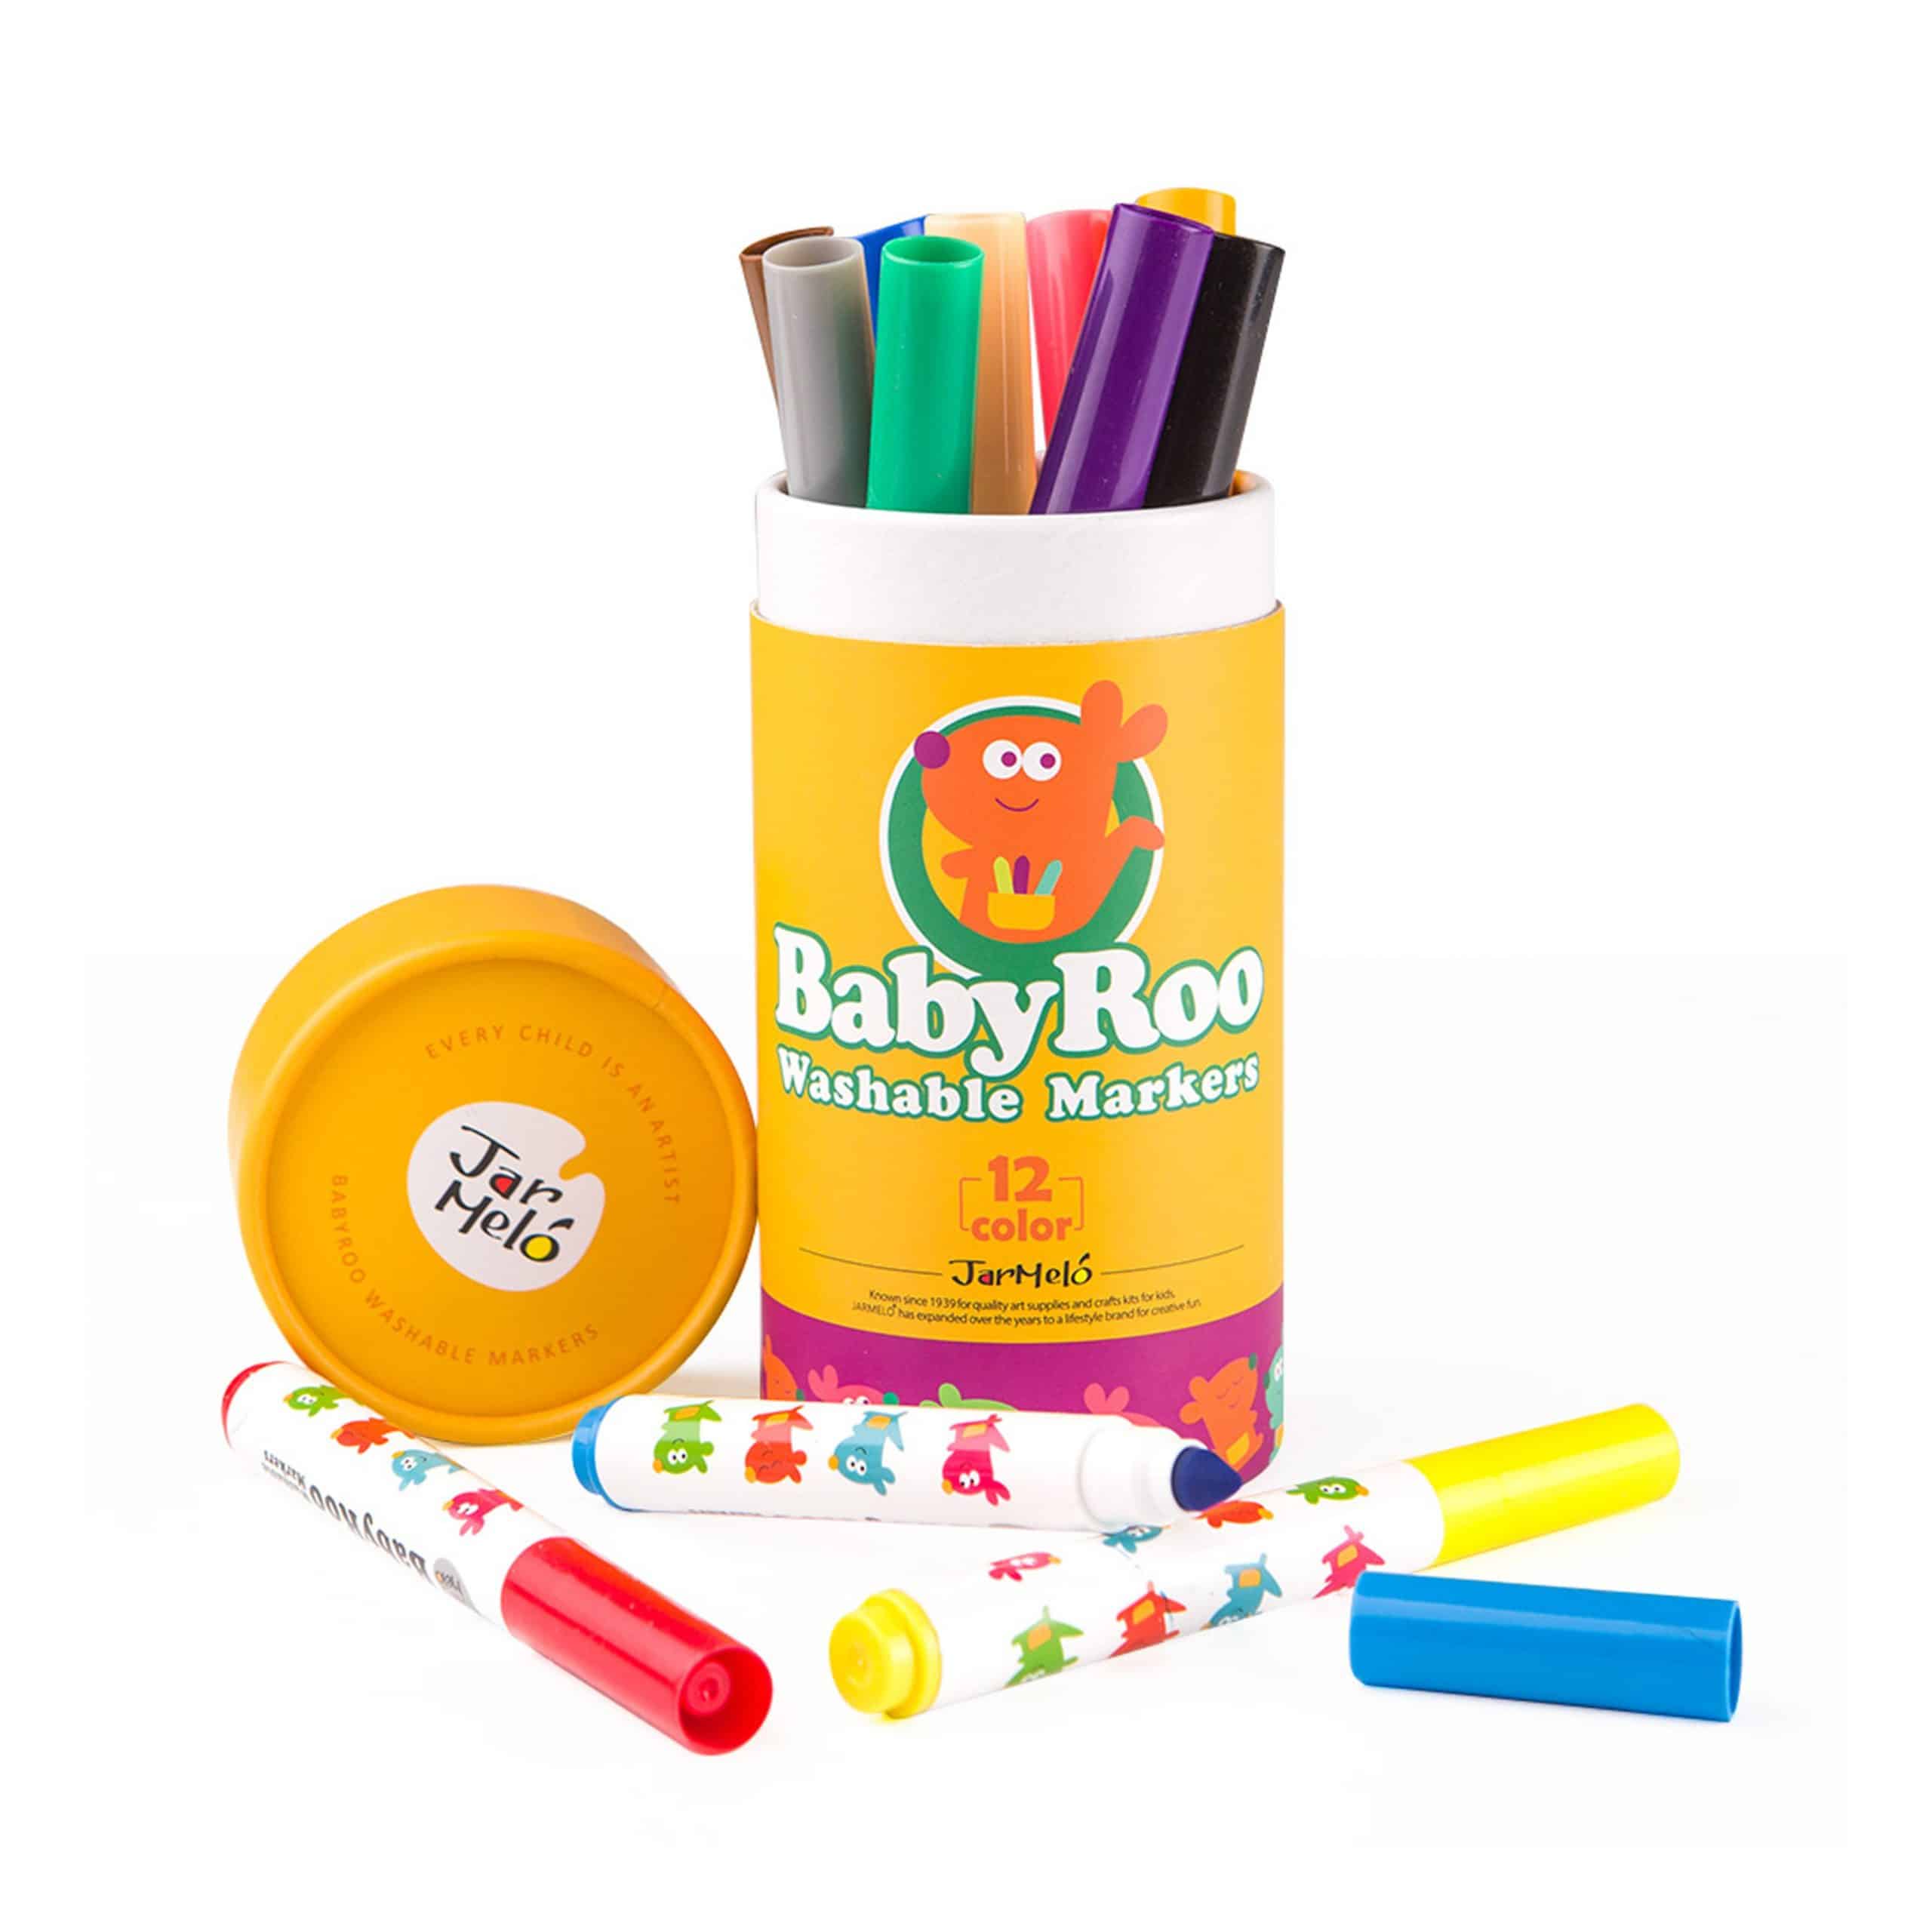 Washable Marker Baby Roo JarMelo 1598156276 scaled | Trio Kids | March, 2023